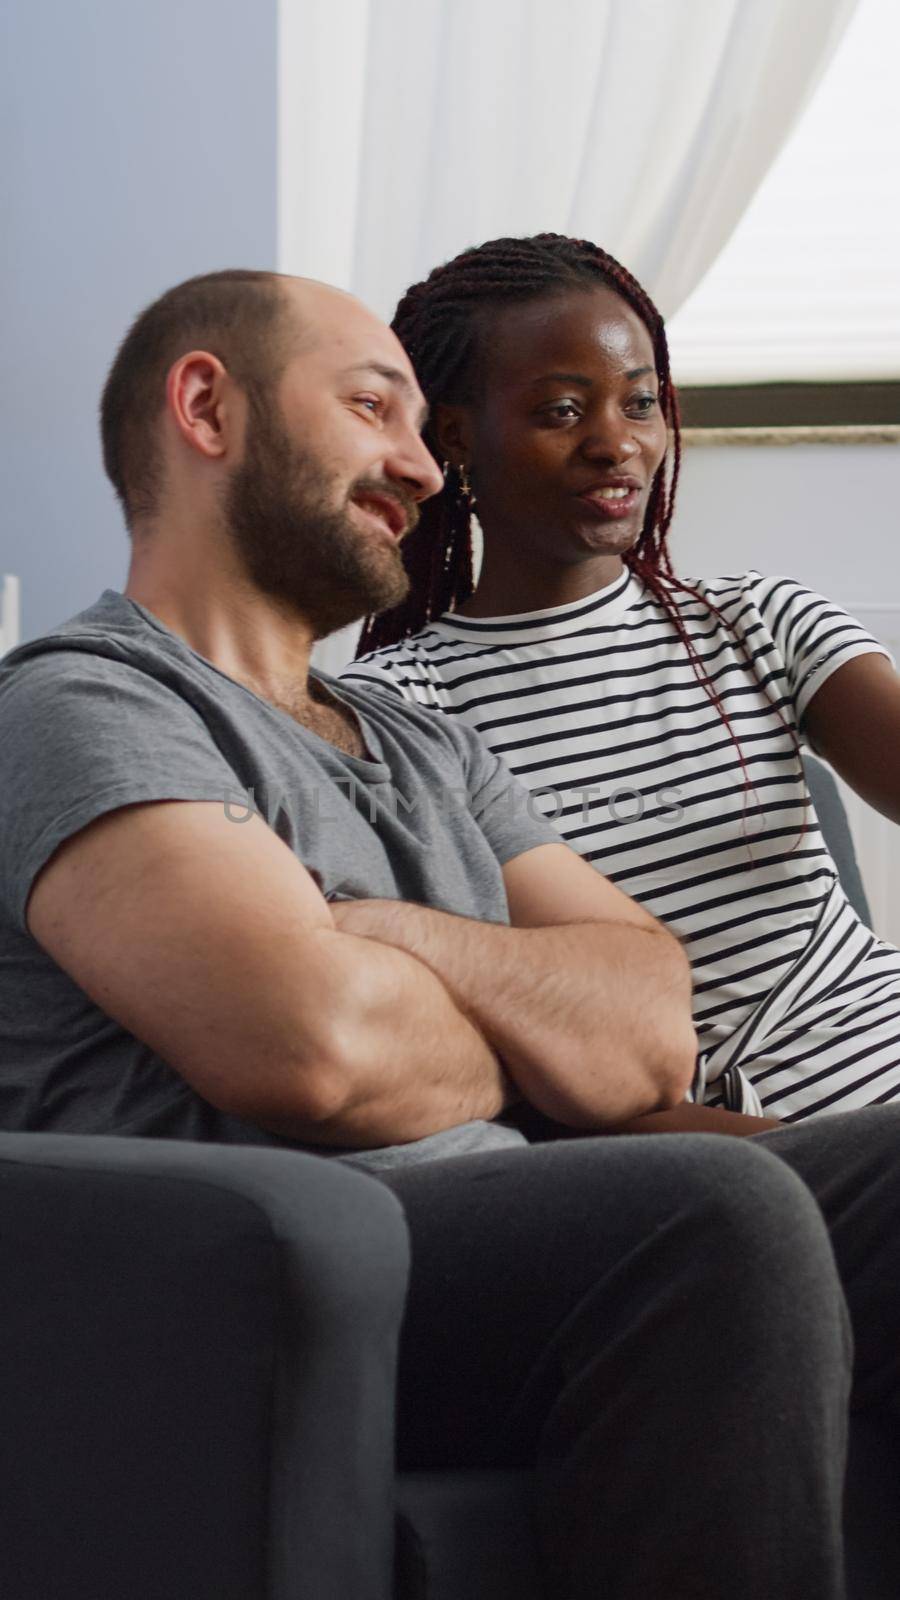 Interracial partners using video call on smartphone by DCStudio